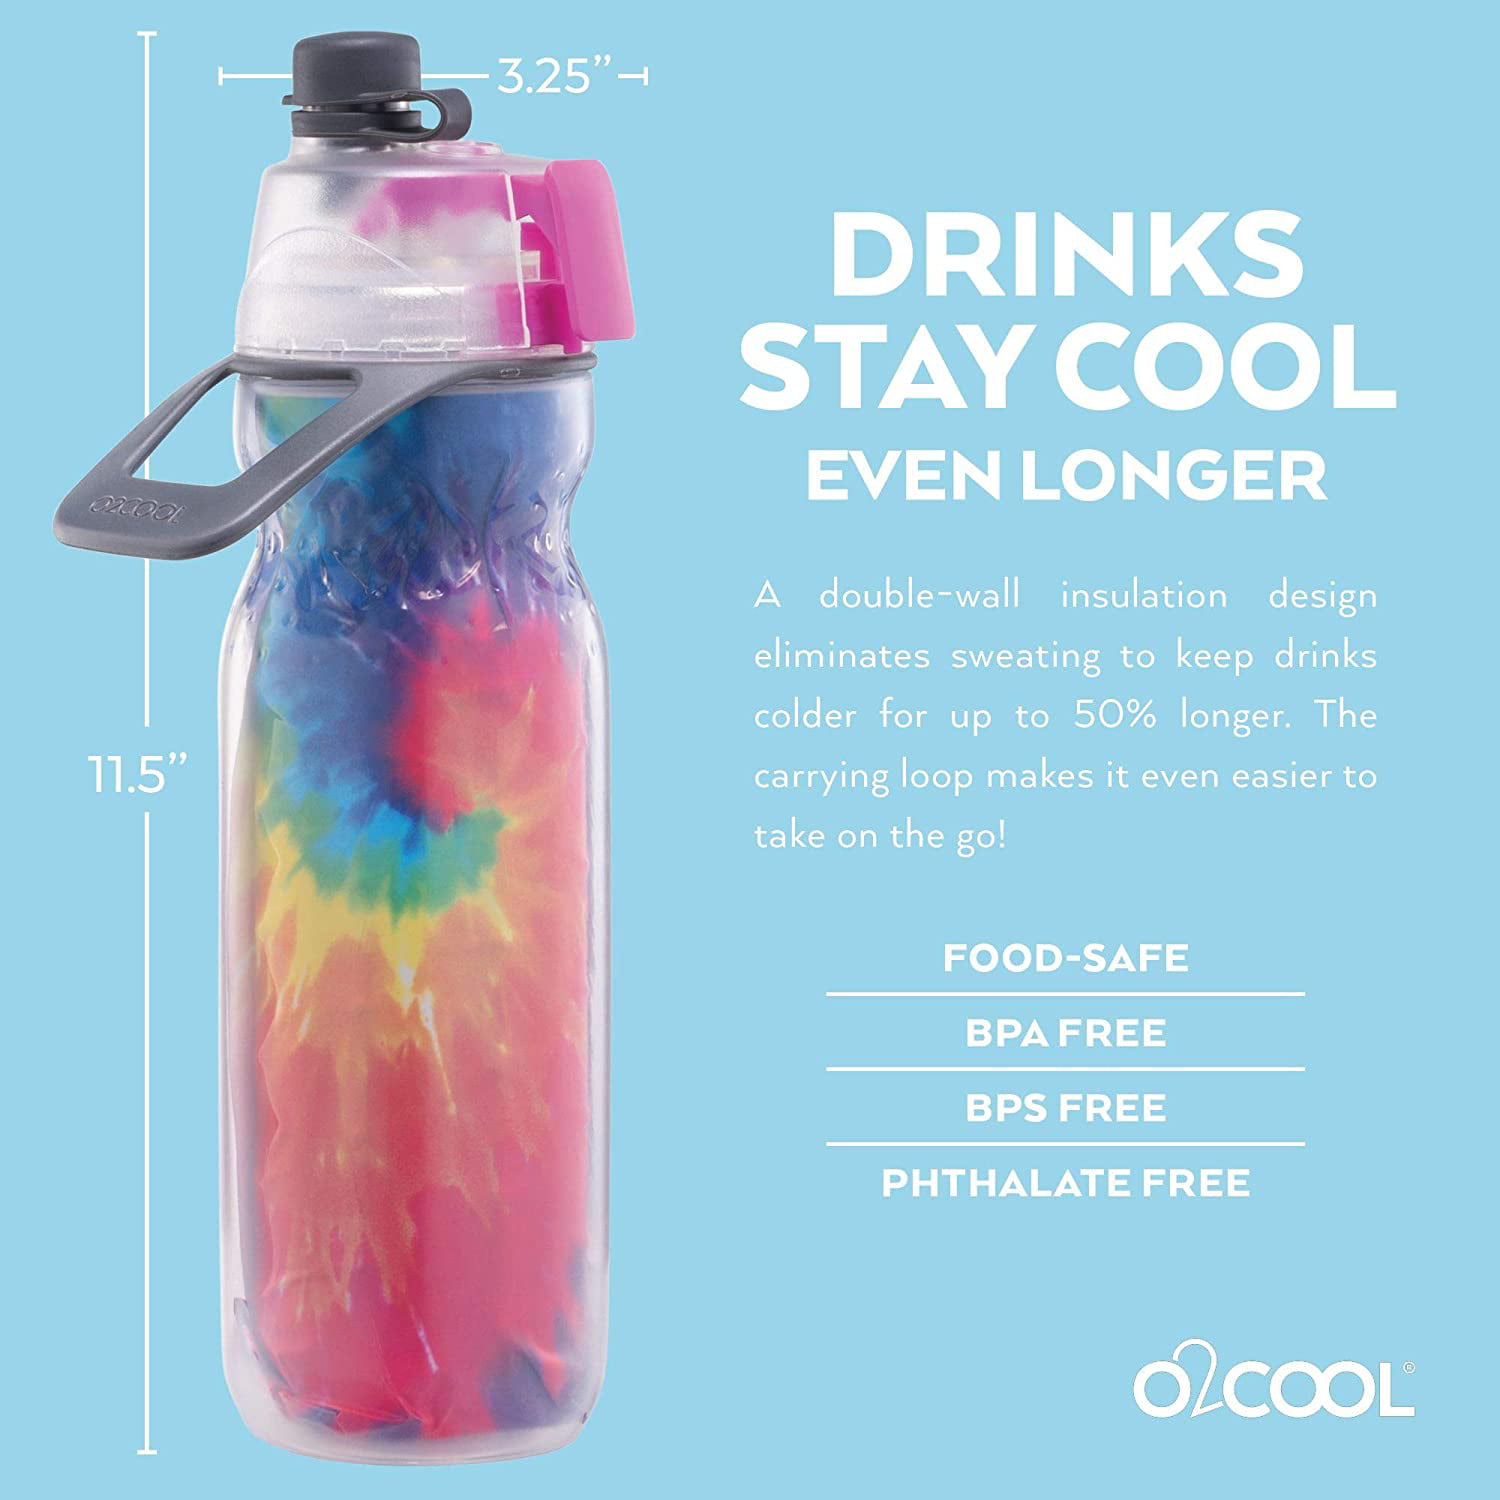 O2COOL Mist 'N Sip Misting Water Bottle 2-in-1 Mist And Sip Function With  No Leak Pull Top Spout Spo…See more O2COOL Mist 'N Sip Misting Water Bottle